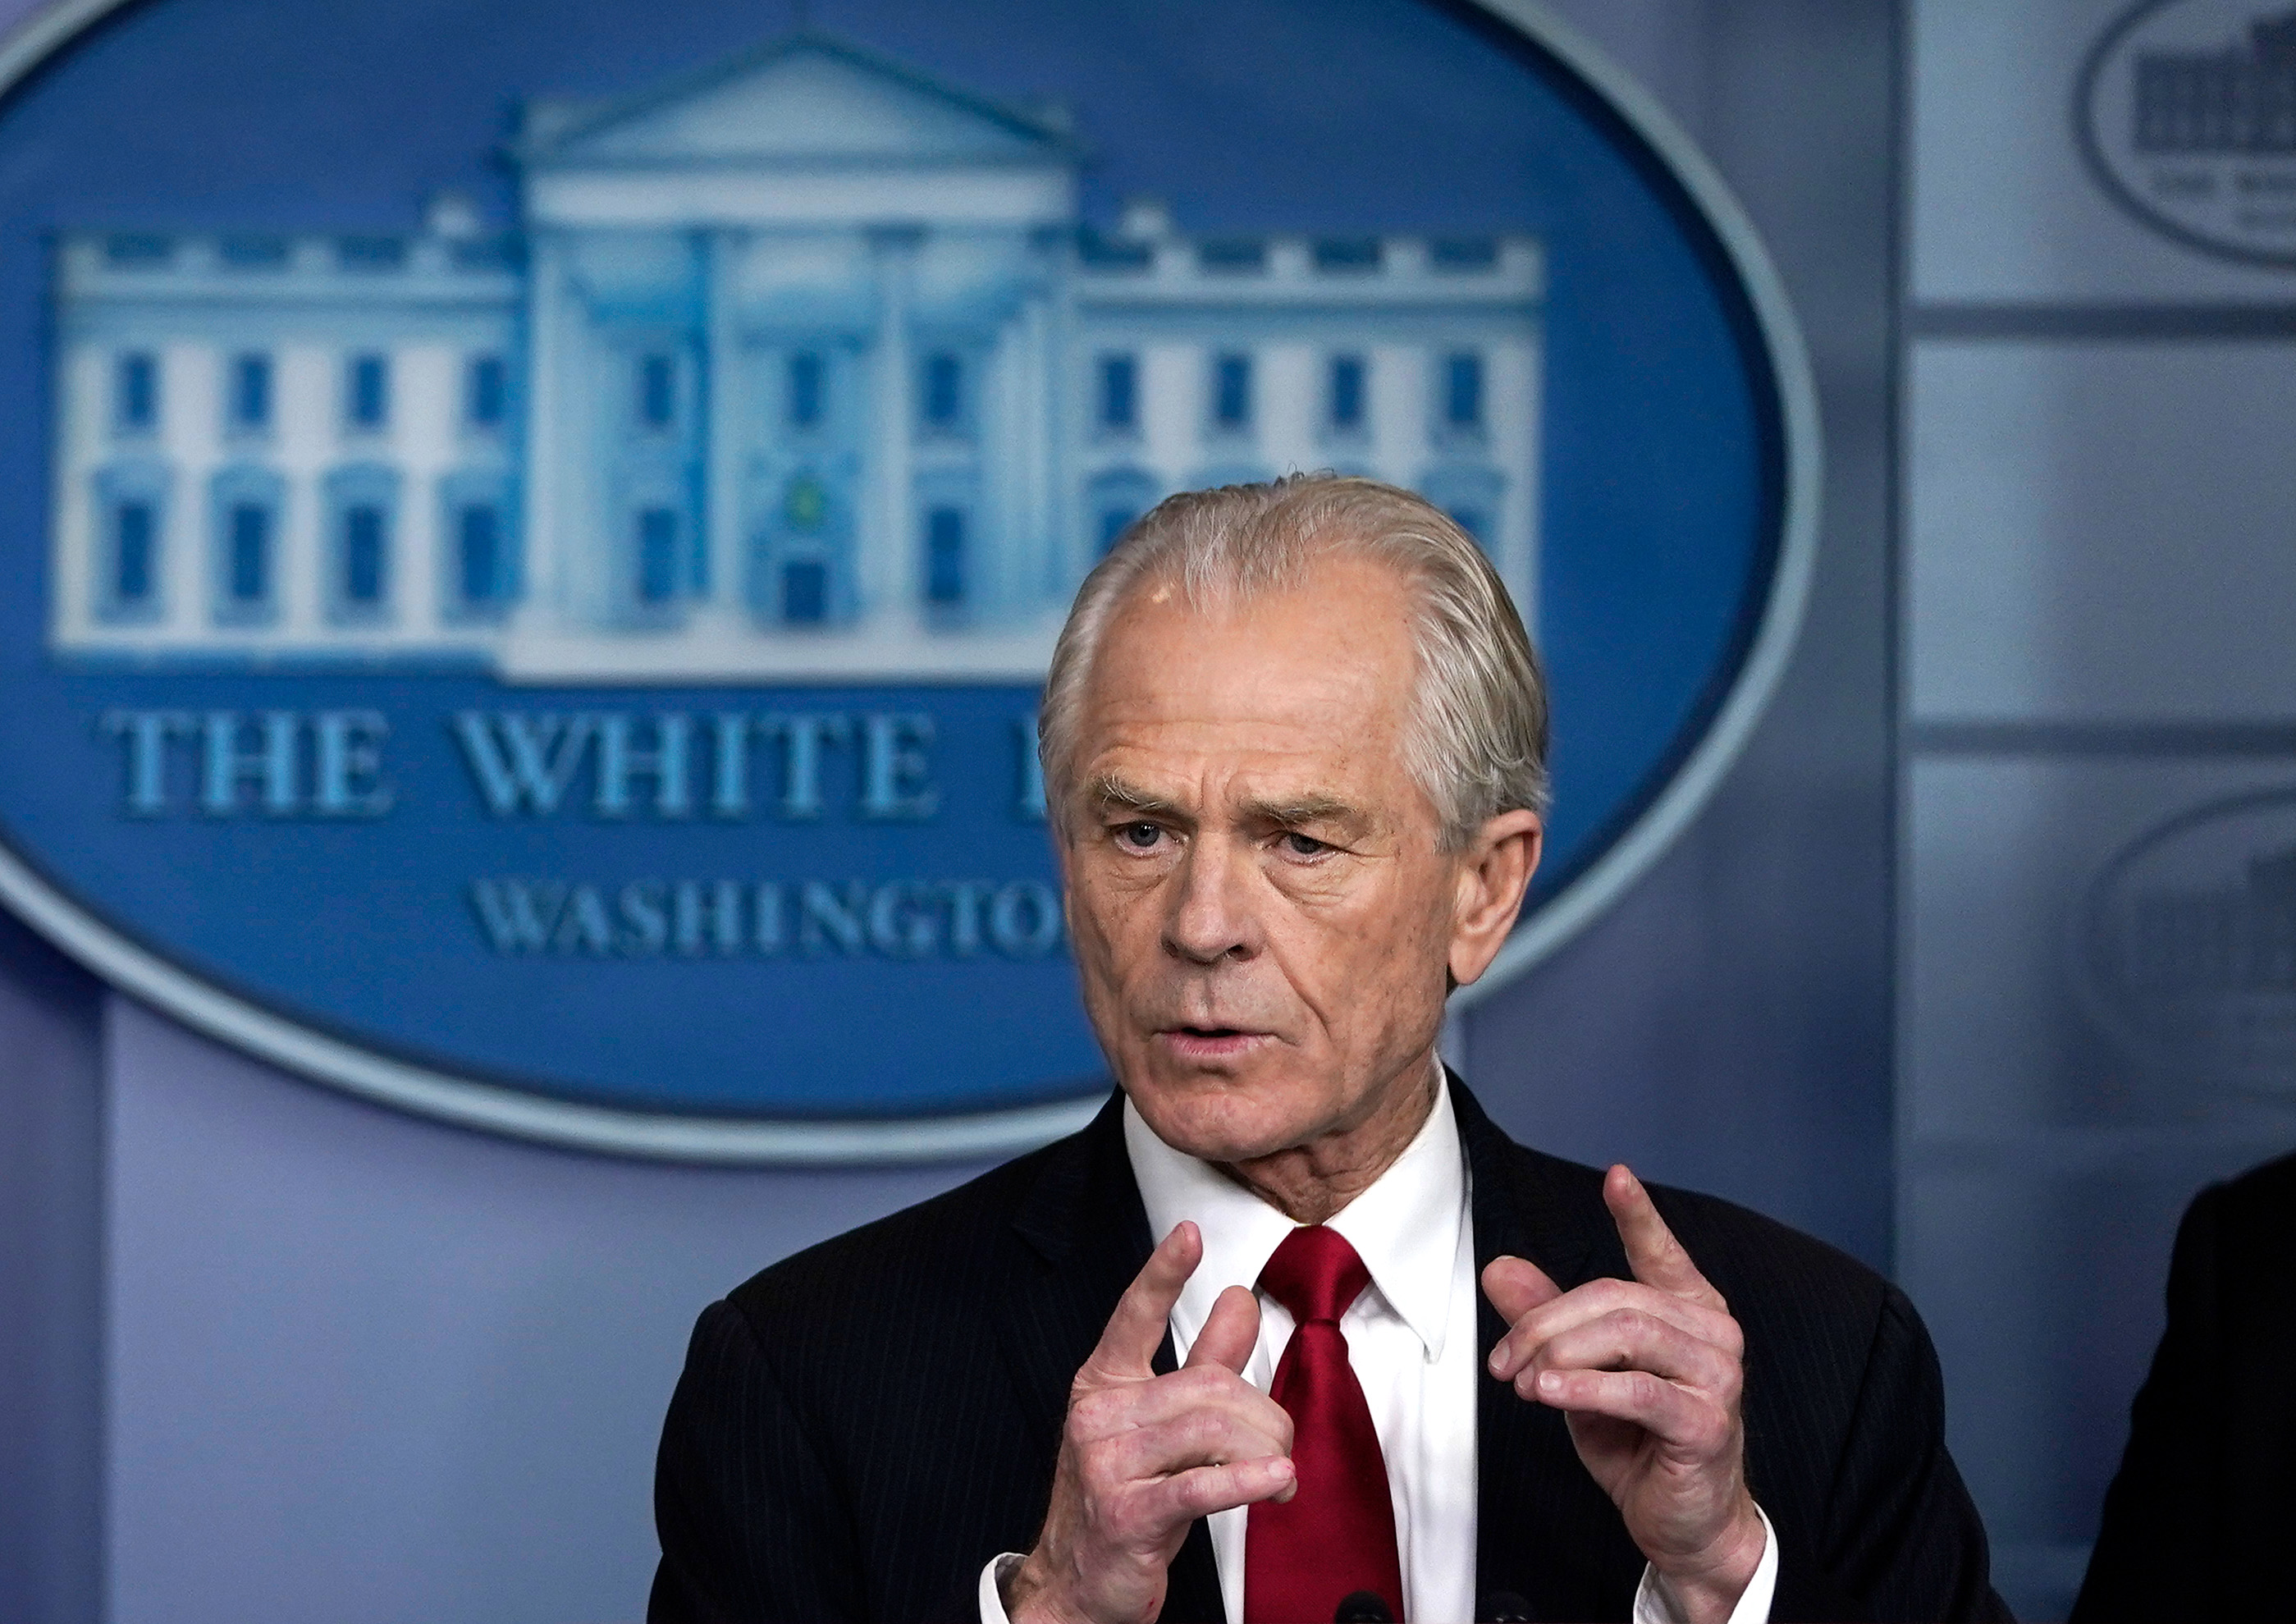 WASHINGTON, DC - MARCH 27: White House Trade and Manufacturing Policy Director Peter Navarro speaks during a briefing on the coronavirus pandemic in the press briefing room of the White House on March 27, 2020 in Washington, DC. President Trump signed the H.R. 748, the CARES Act on Friday afternoon. Earlier in the day, the U.S. House of Representatives approved the $2 trillion stimulus bill that lawmakers hope will battle the economic effects of the COVID-19 pandemic. (Photo by Drew Angerer/Getty Images)